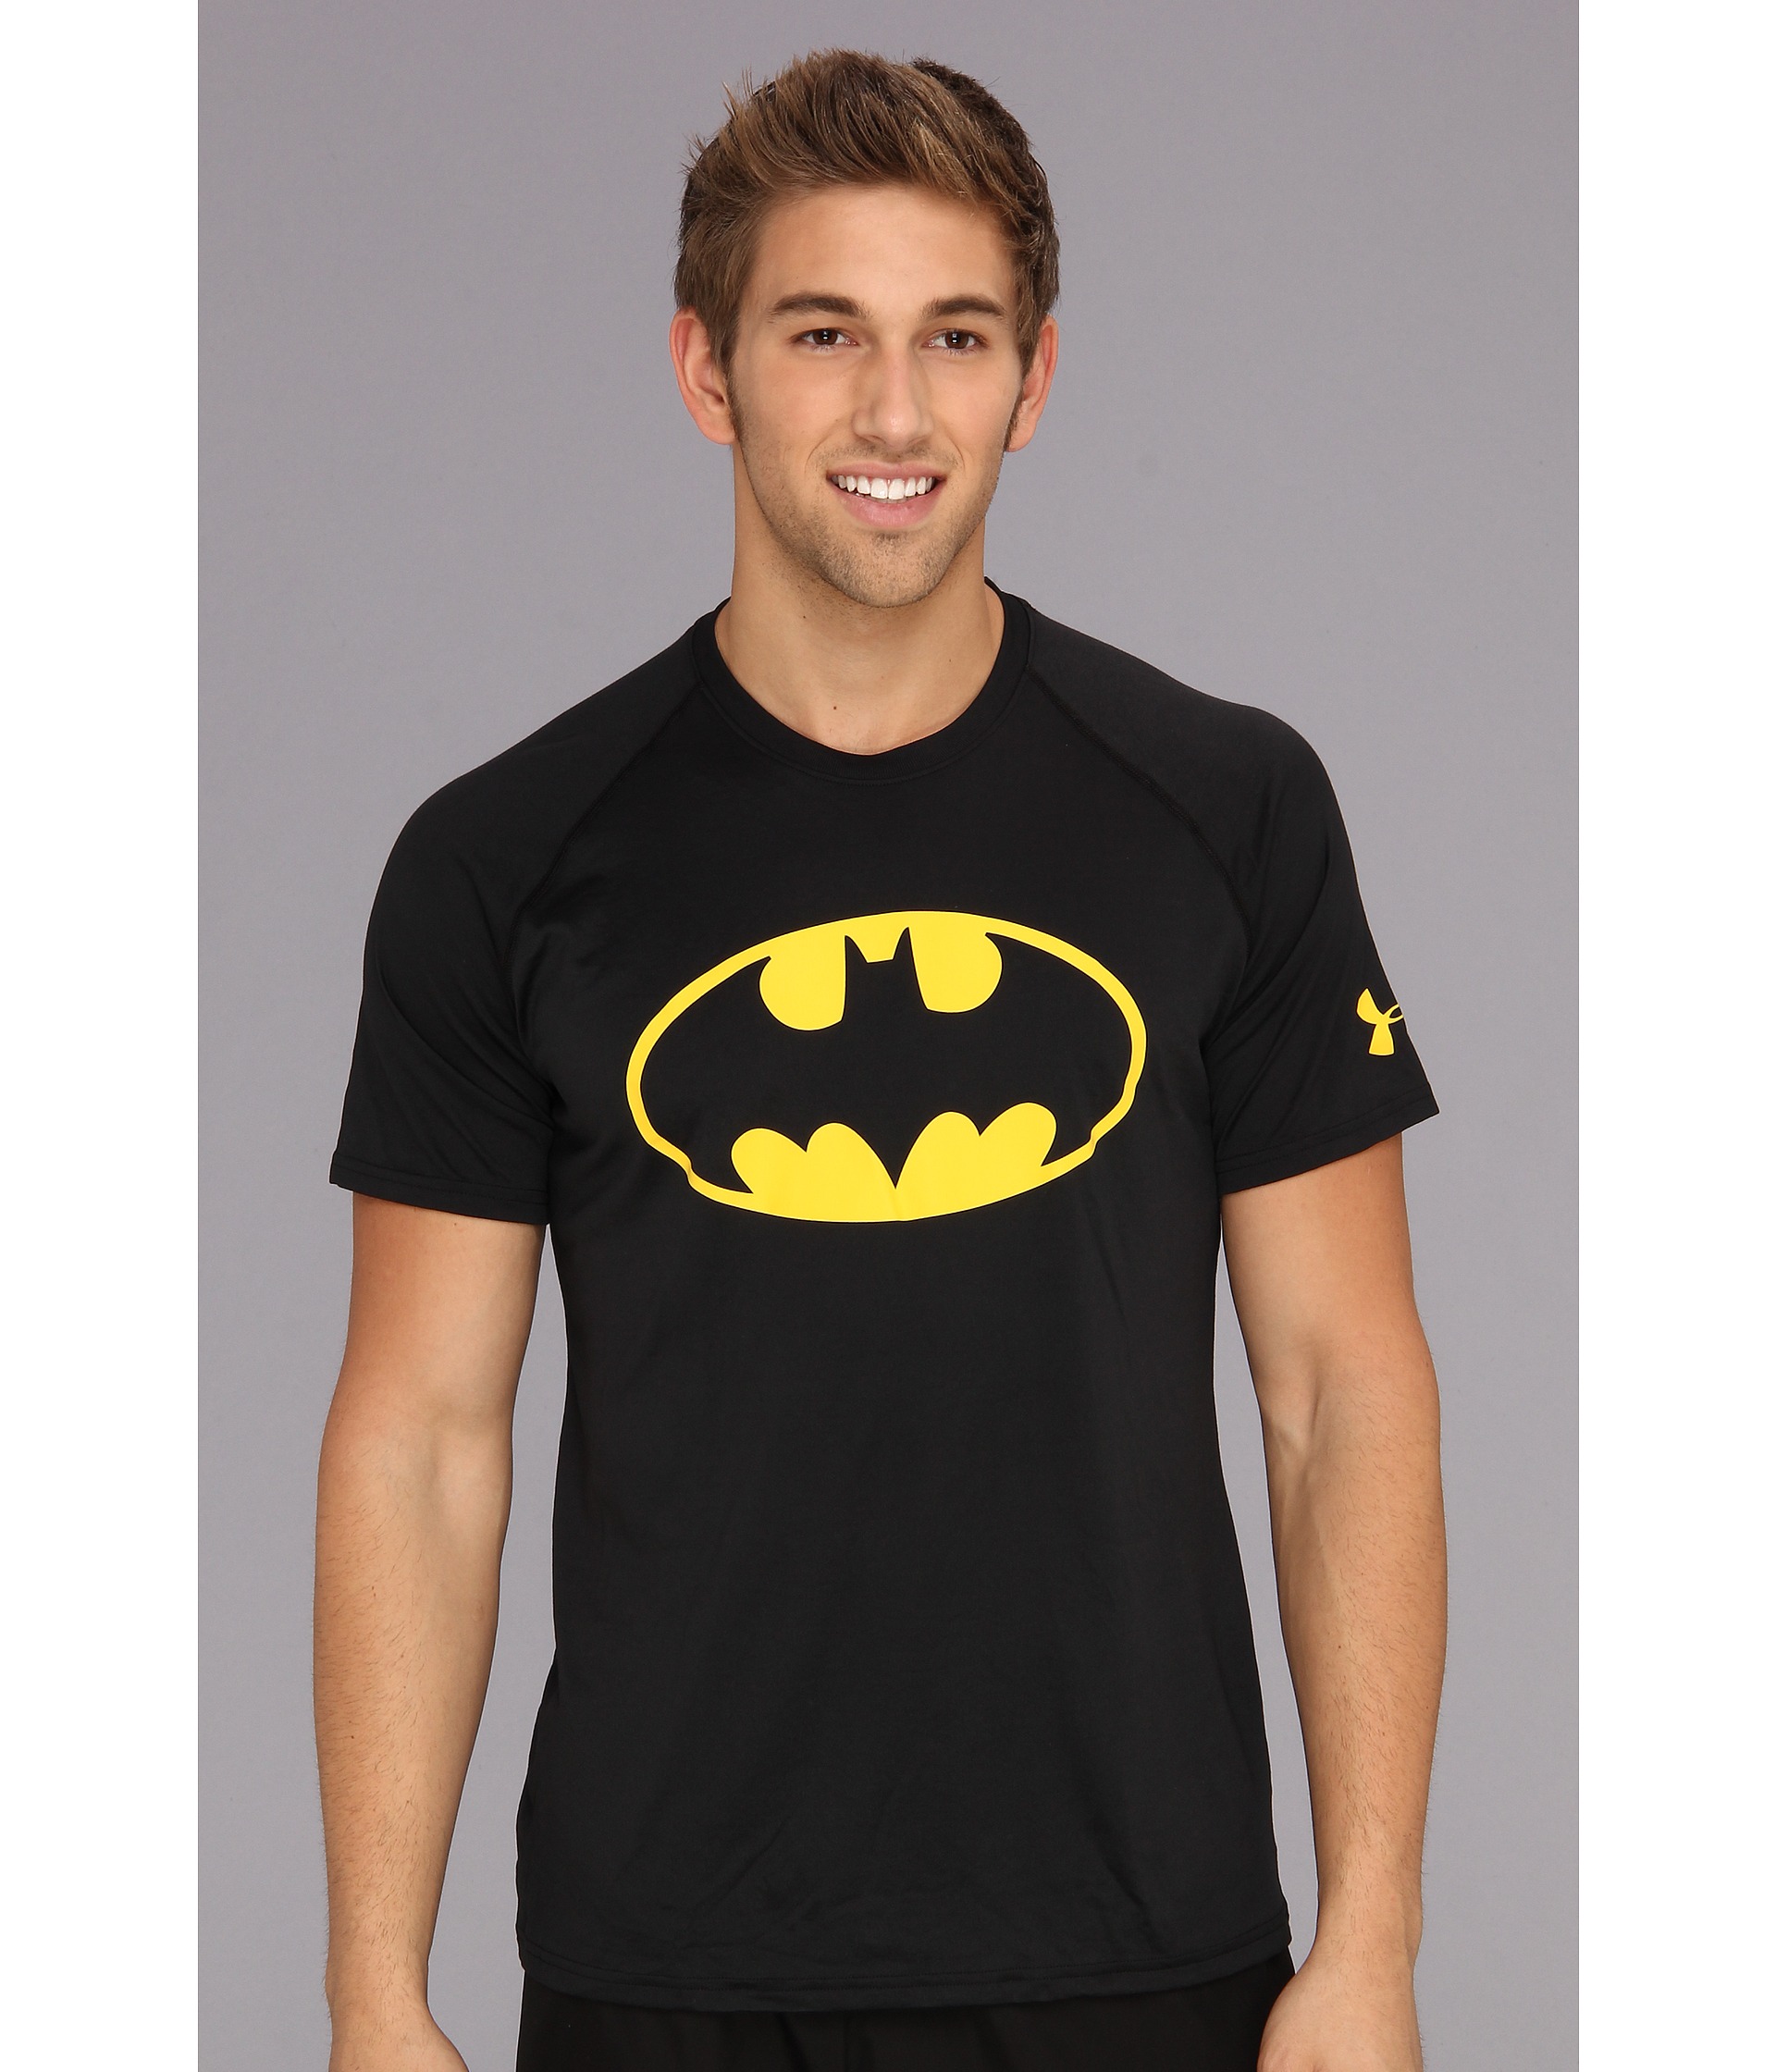 Under Armour Alter Ego Batman T Shirt | Shipped Free at Zappos